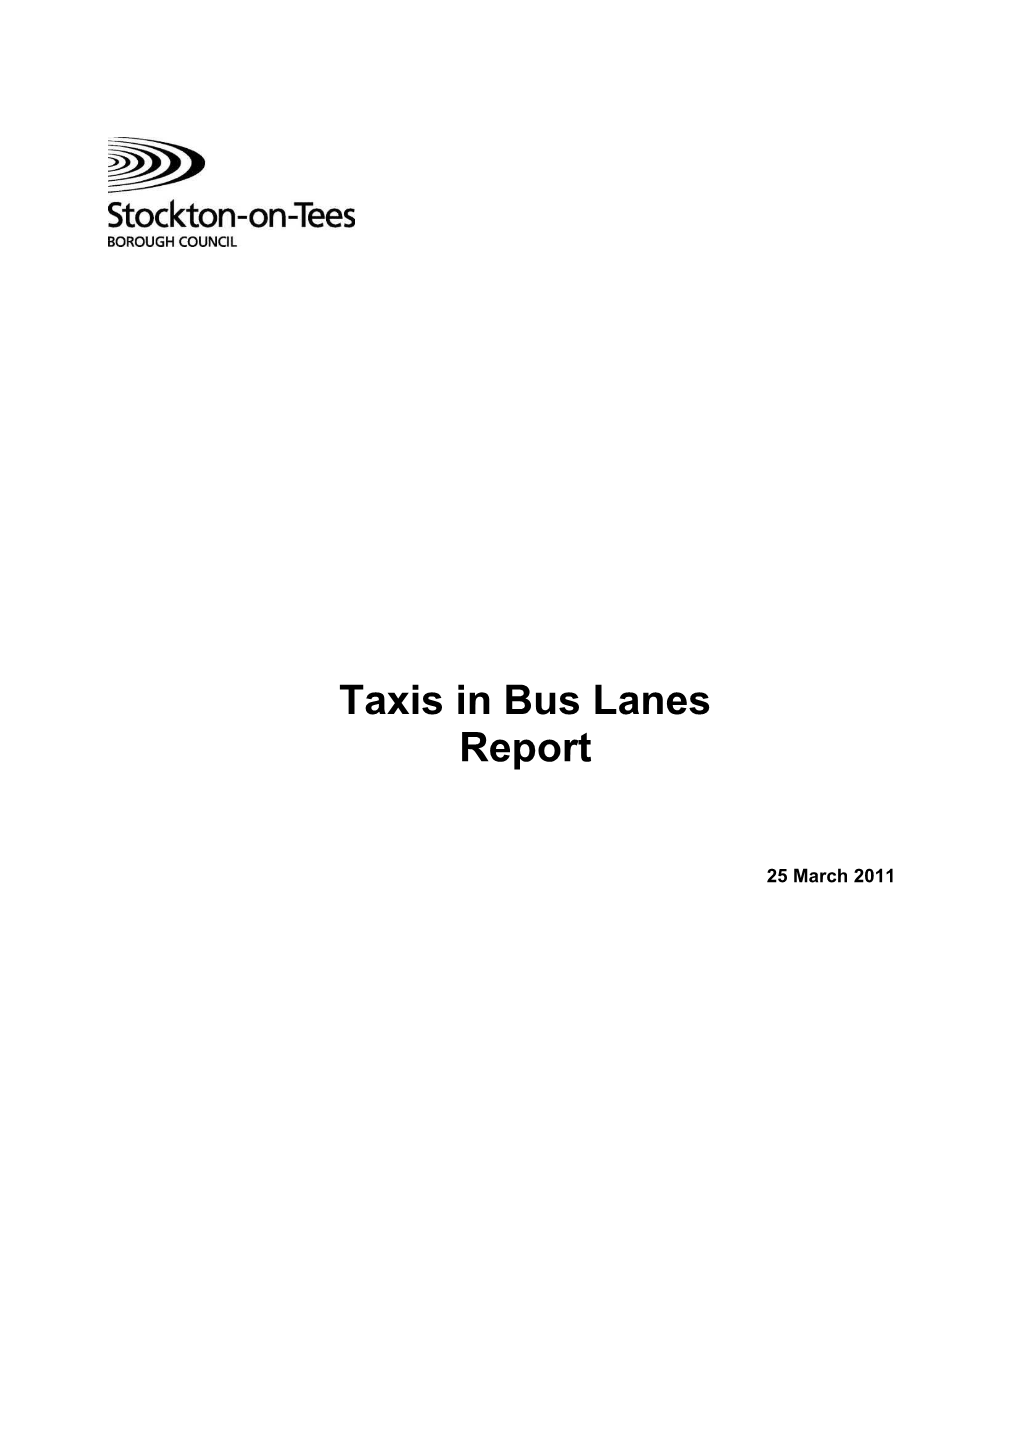 Taxis in Bus Lanes